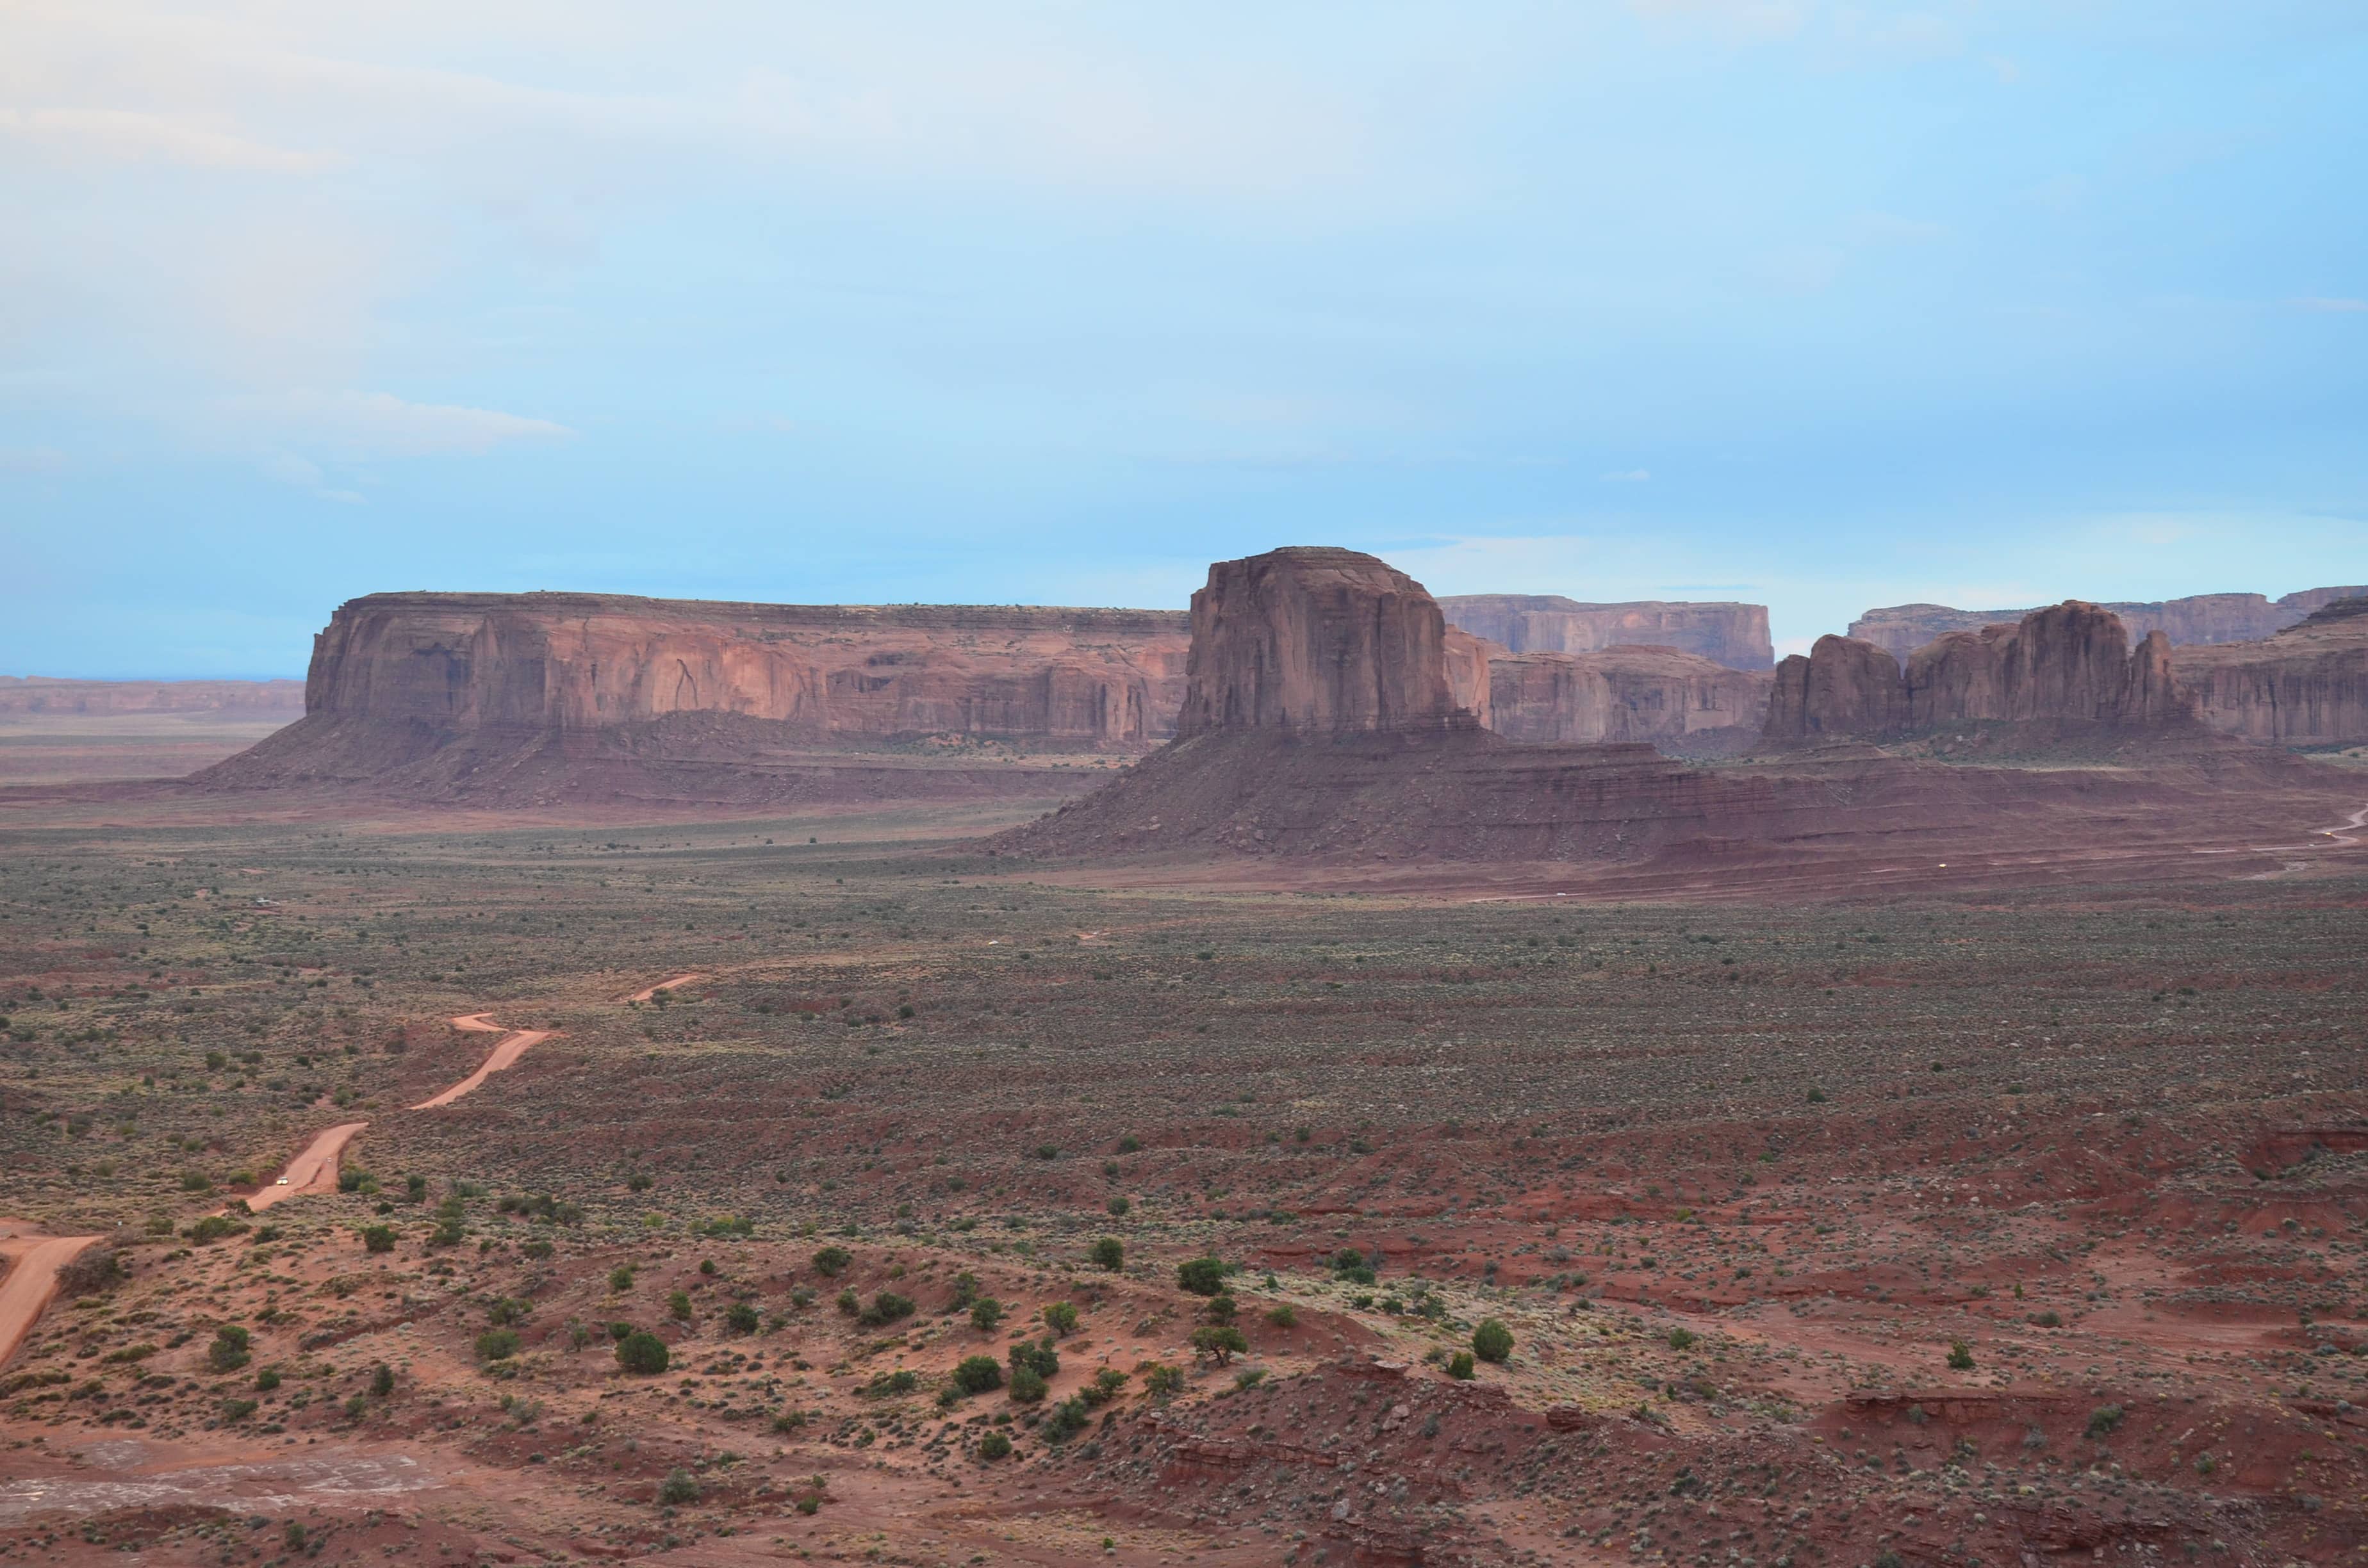 From the viewpoint at Monument Valley Tribal Park in Arizona